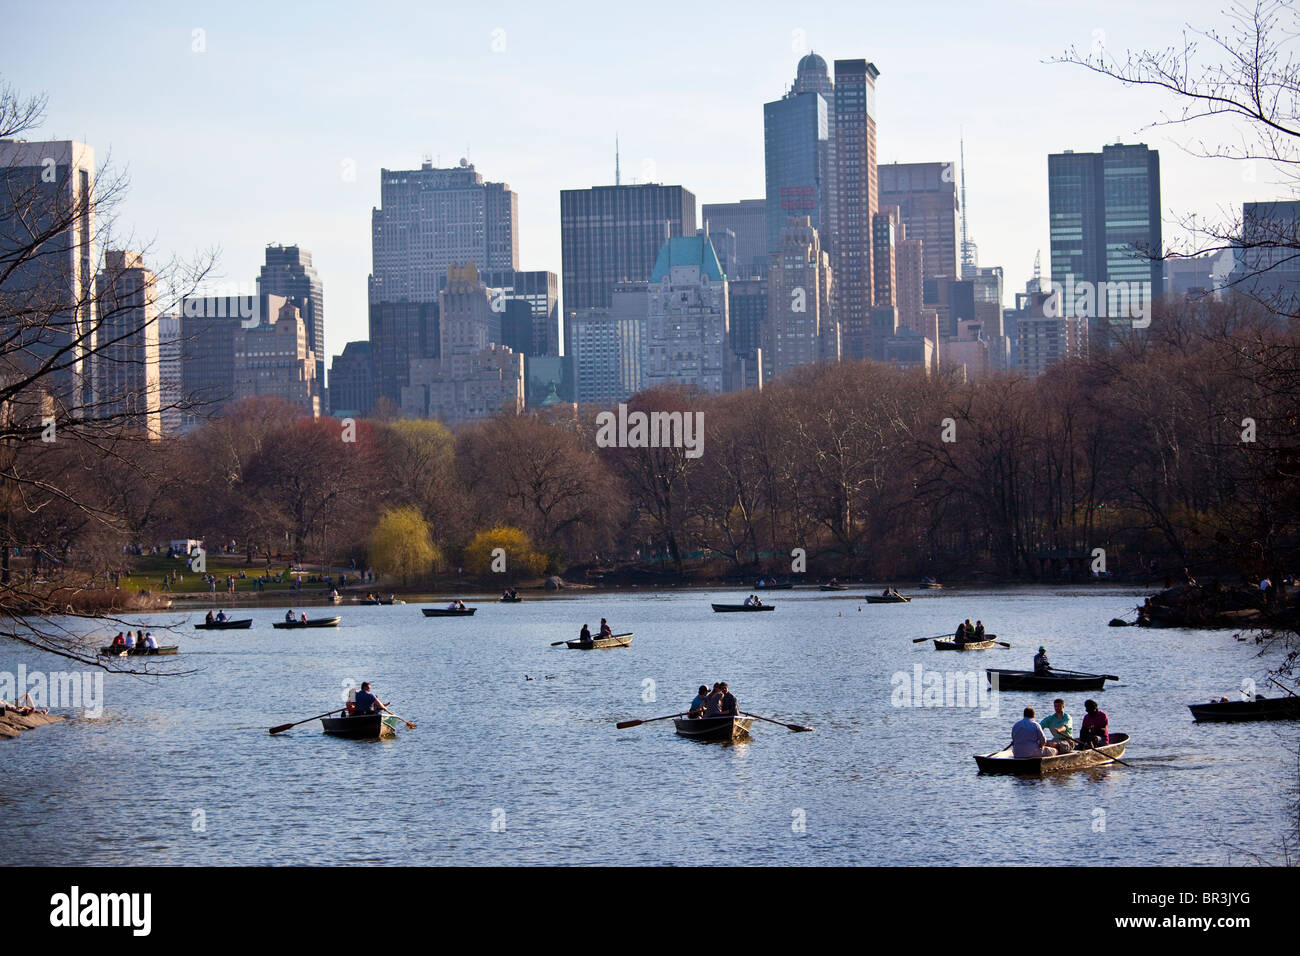 Rowboats on the lake in Central Park, New York City Stock Photo